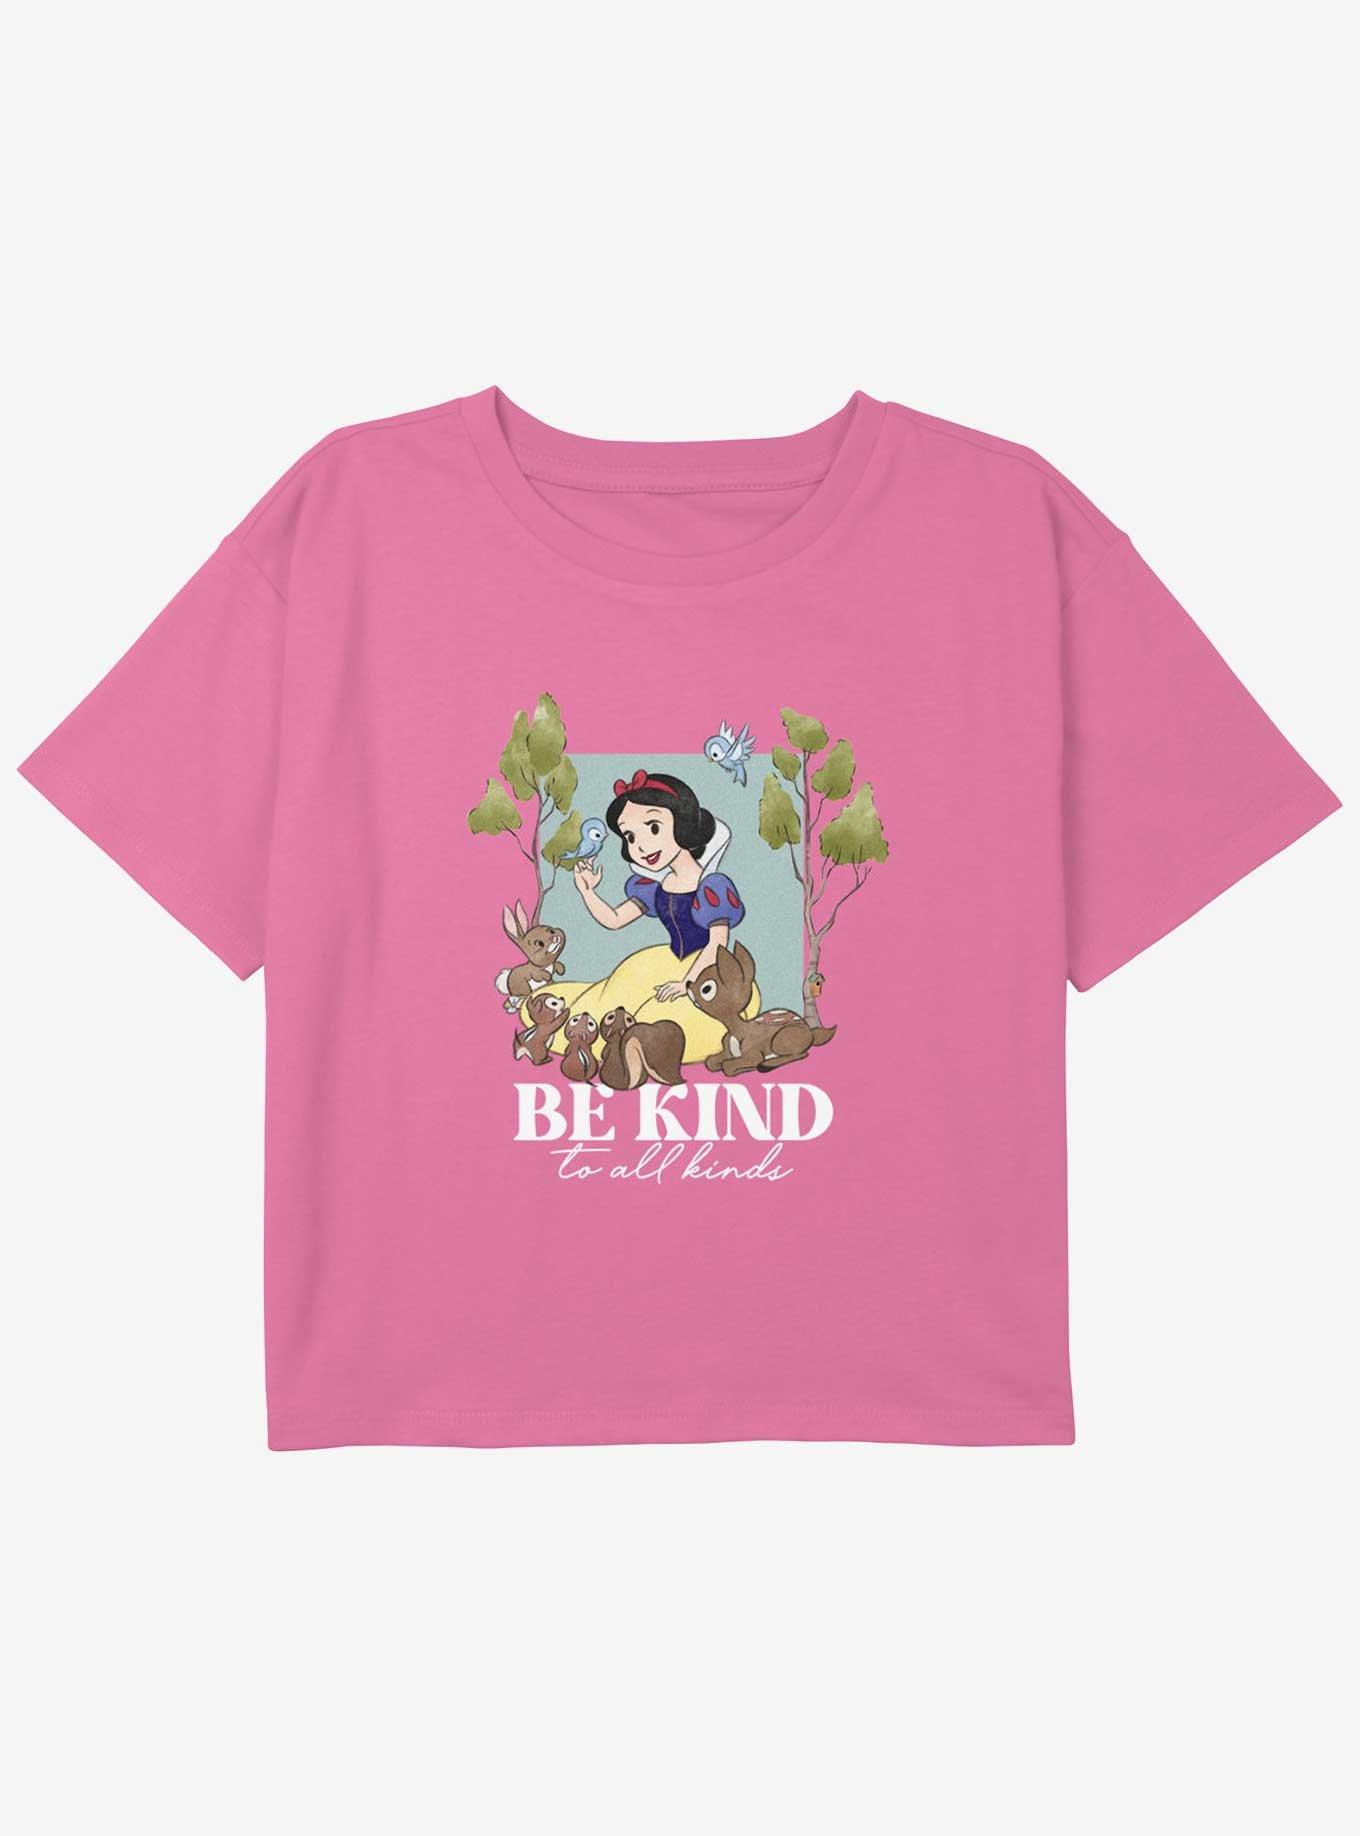 Disney Snow White and the Seven Dwarfs Be Kind Girls Youth Crop T-Shirt, PINK, hi-res